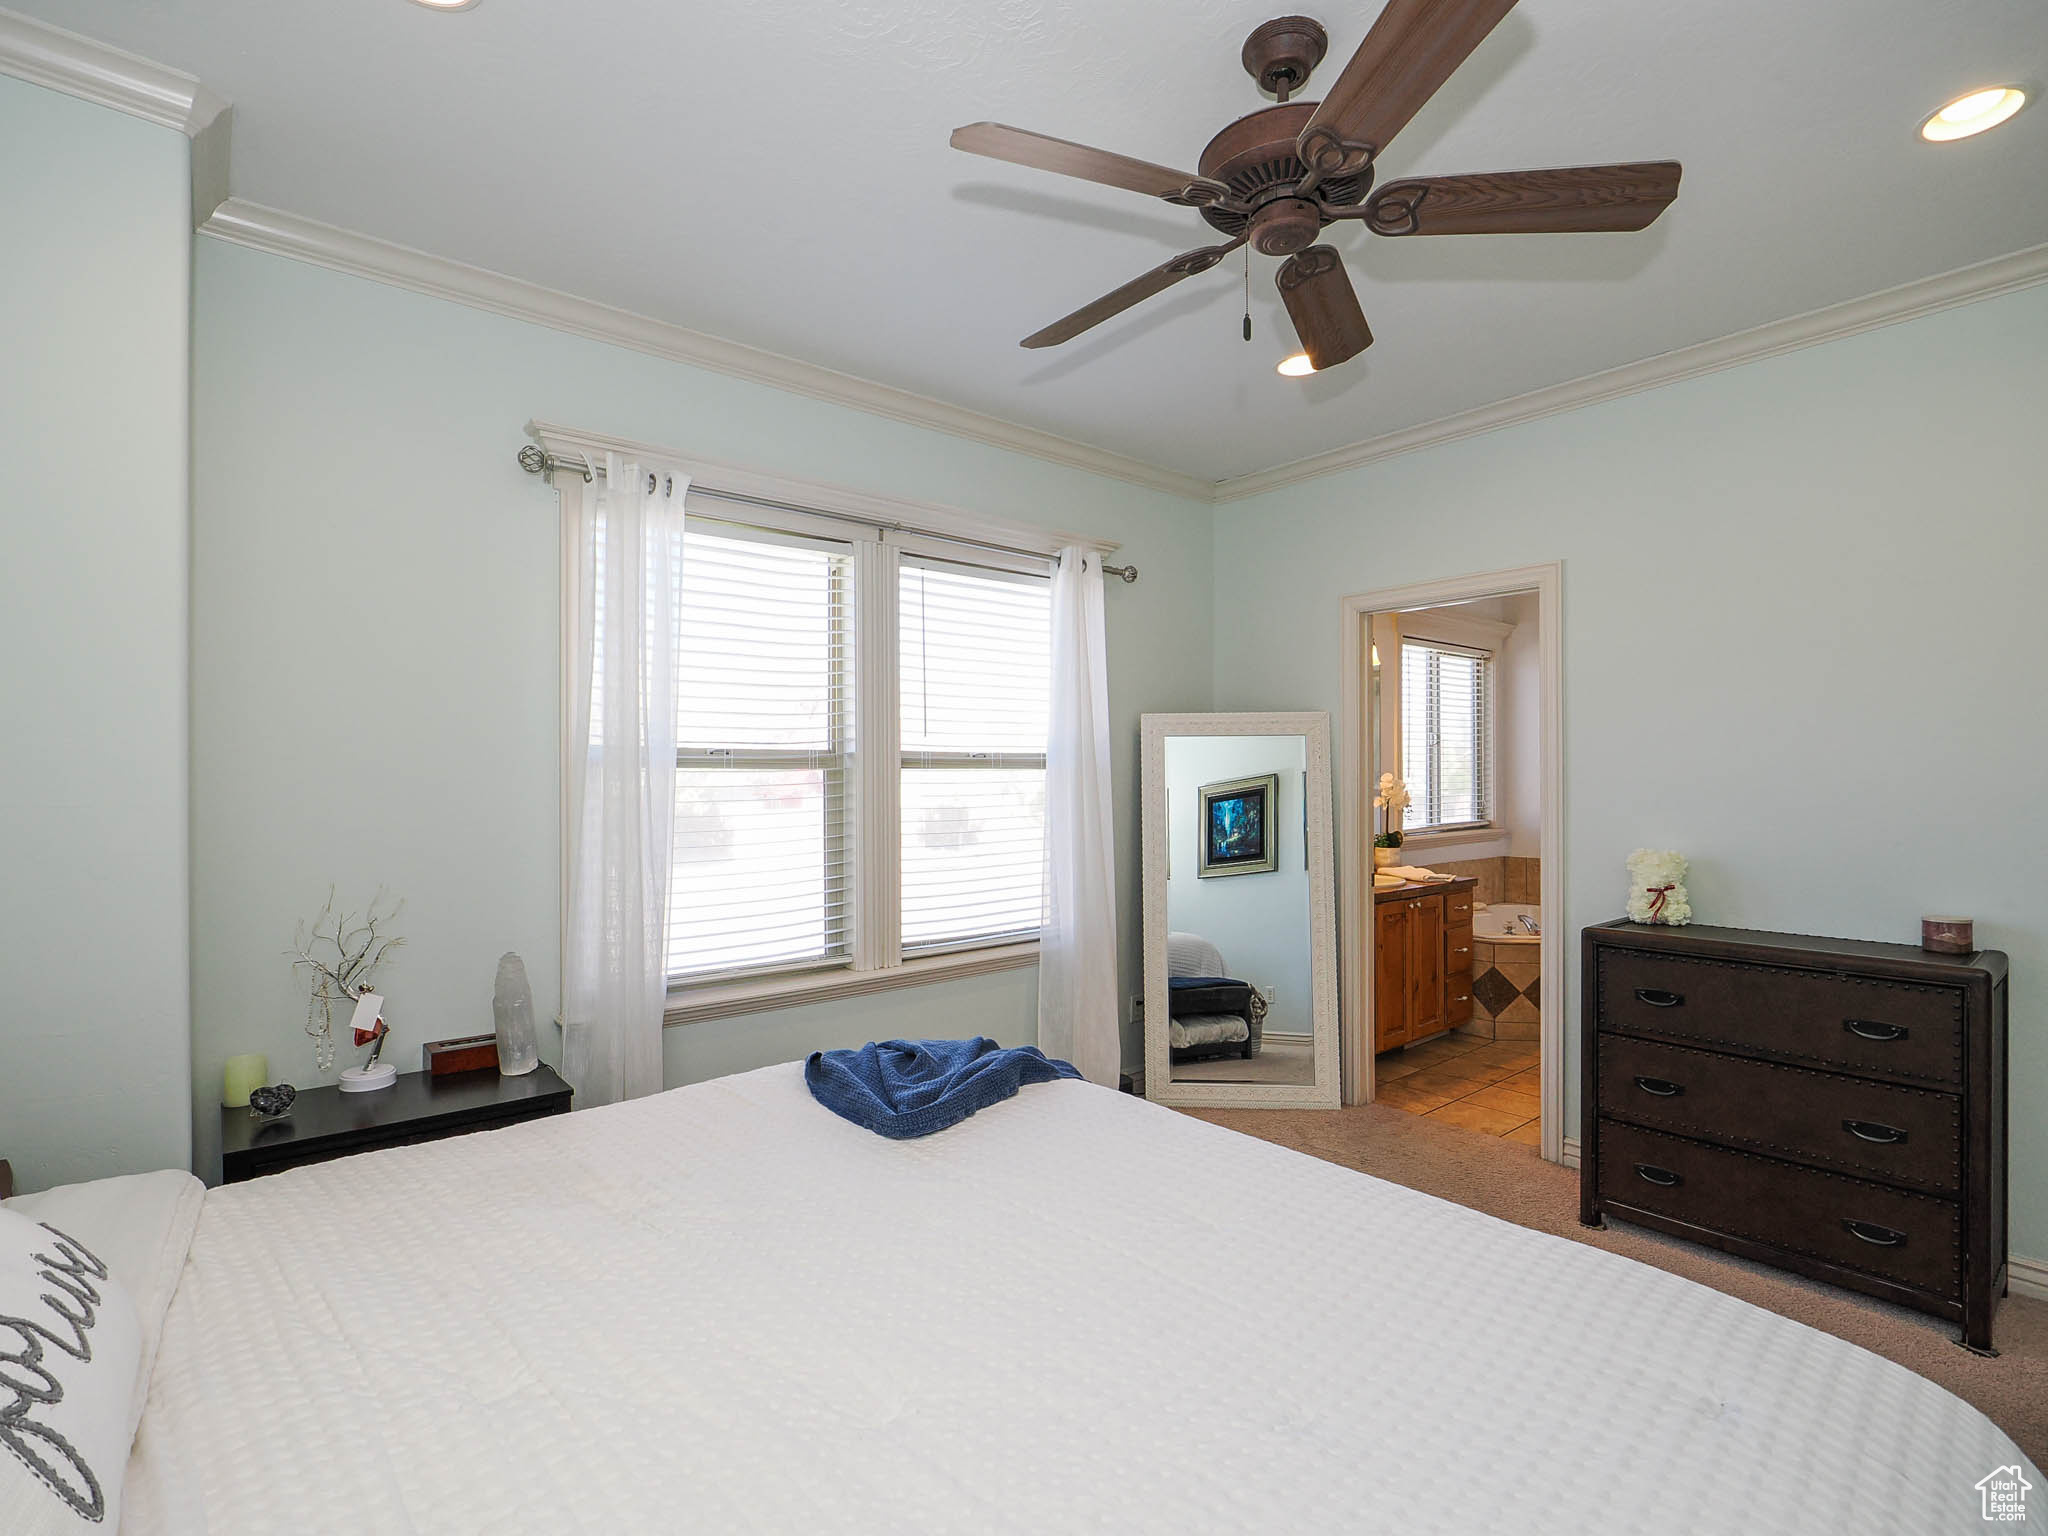 Master bedroom featuring crown molding, ceiling fan, and ensuite bathroom